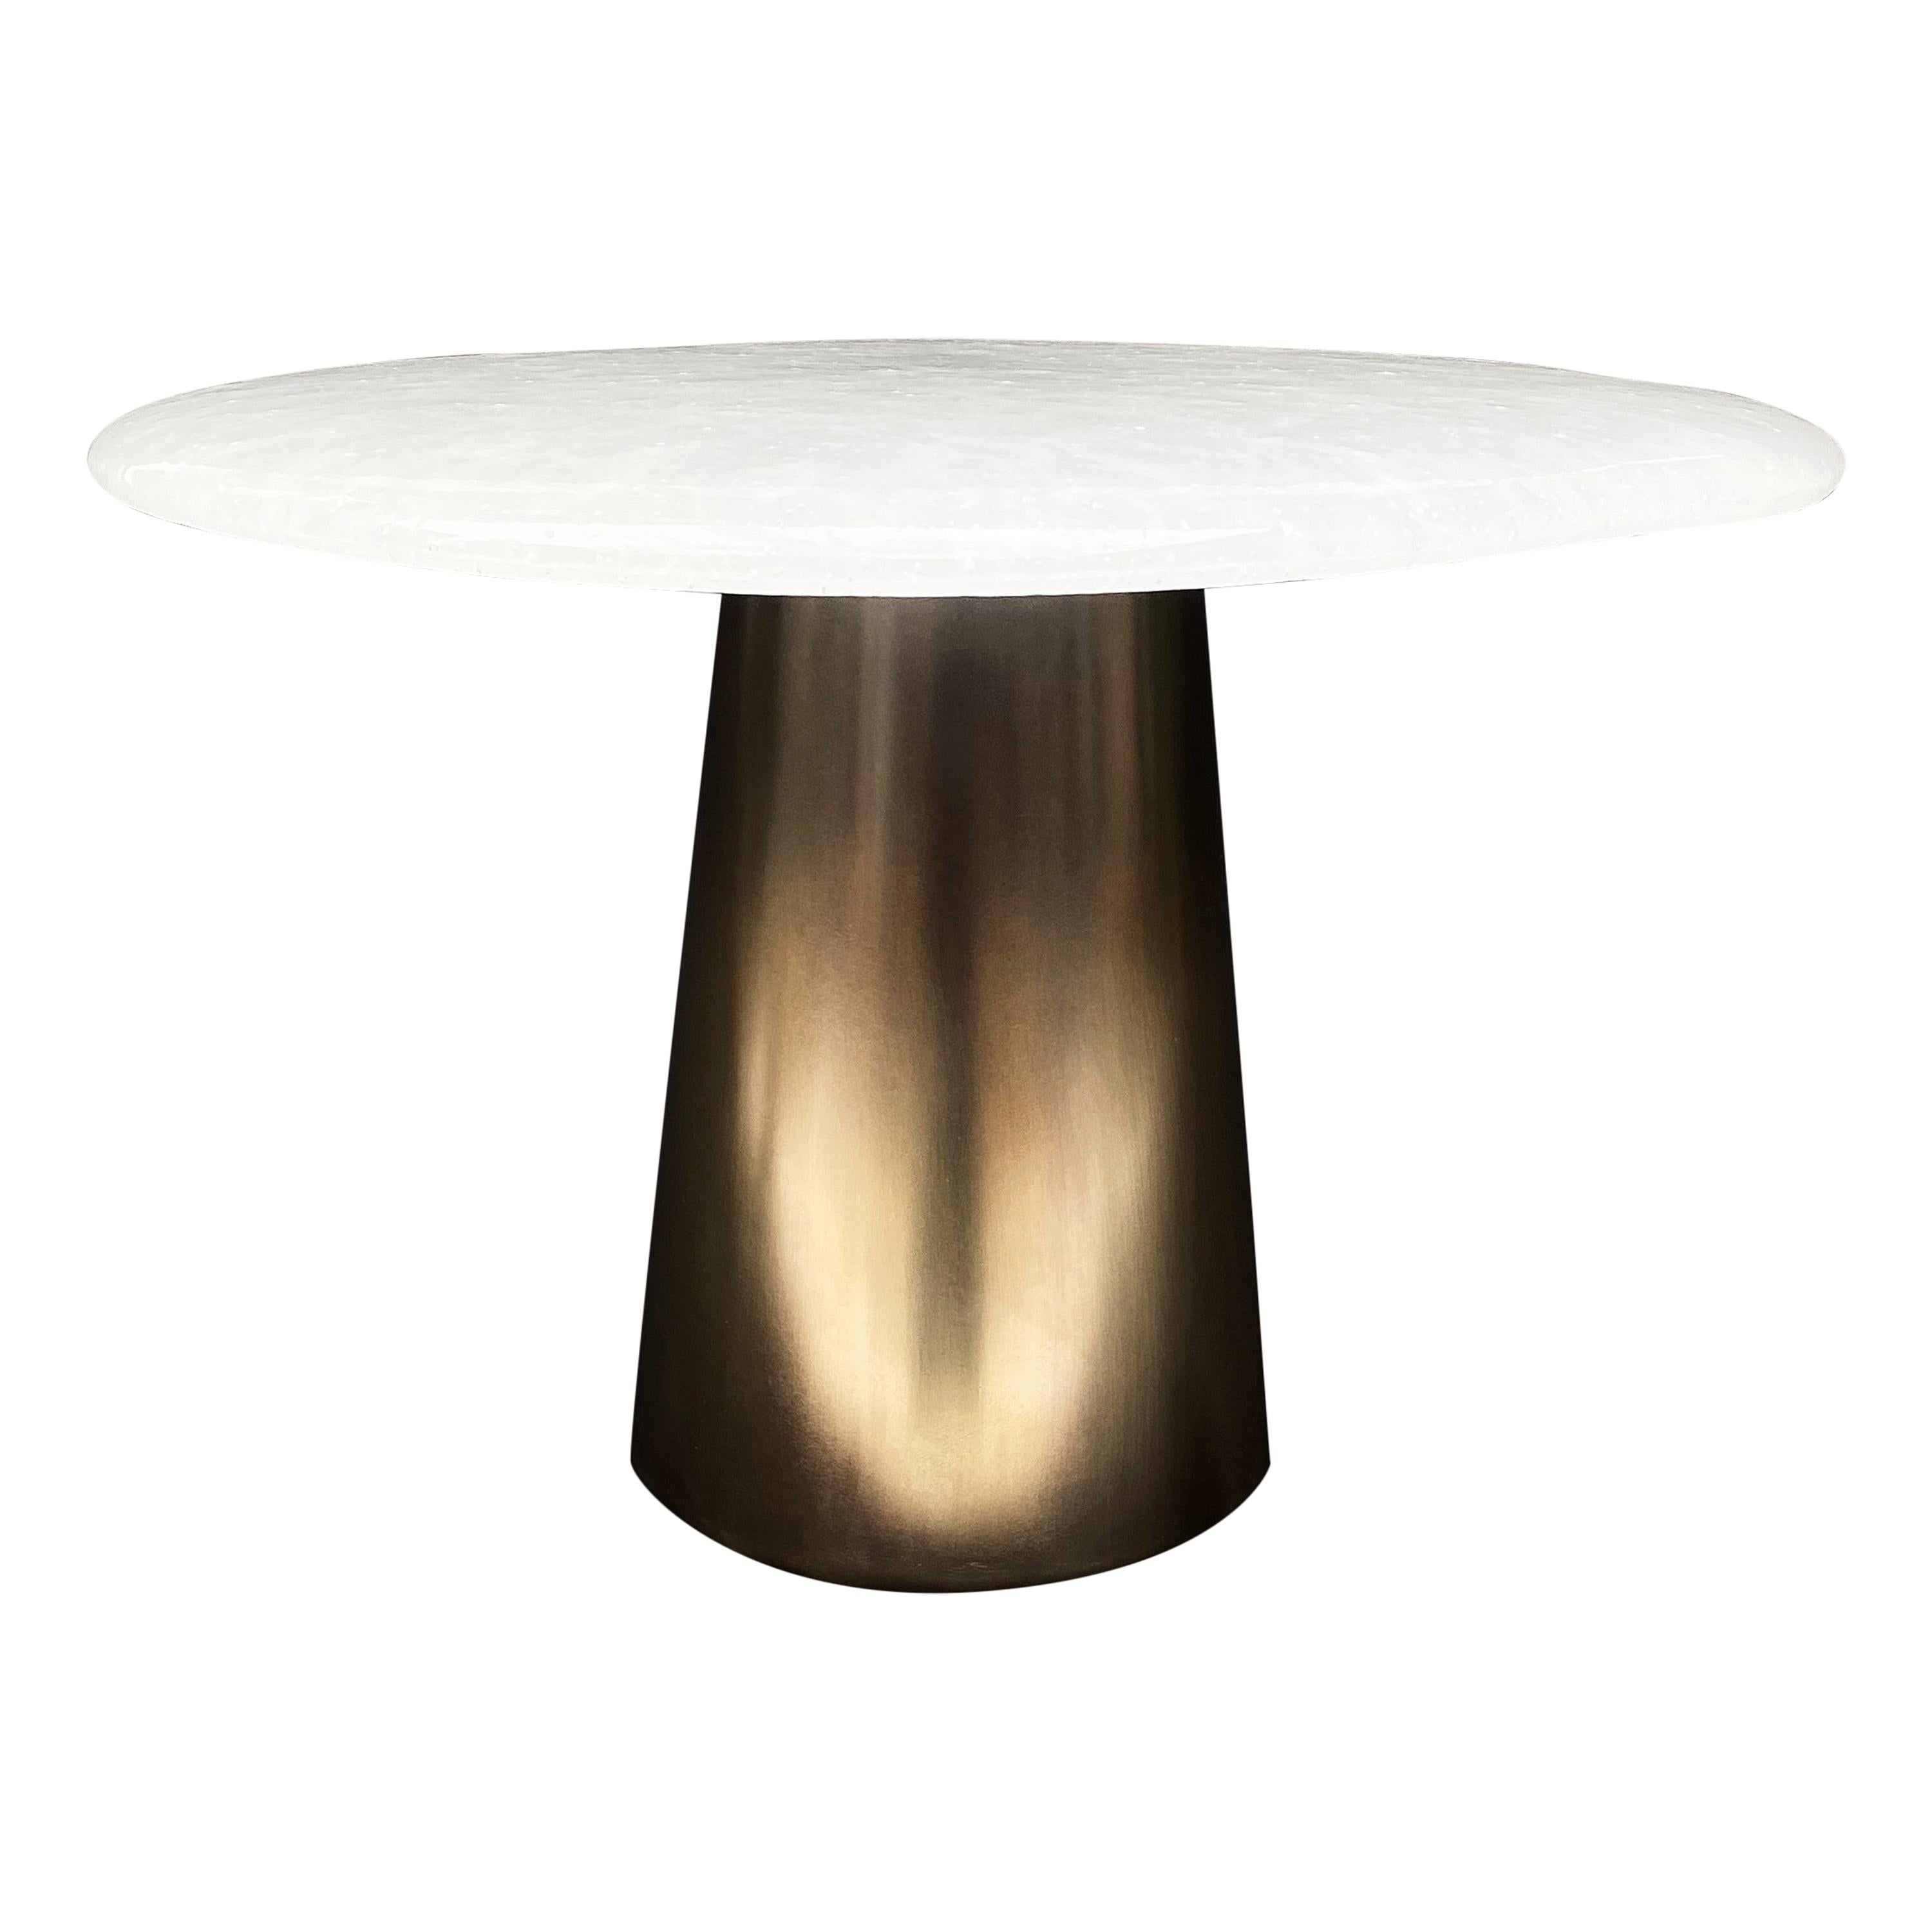 Kinoko Brass and Glass Side Table, Signed by Stefan Leo